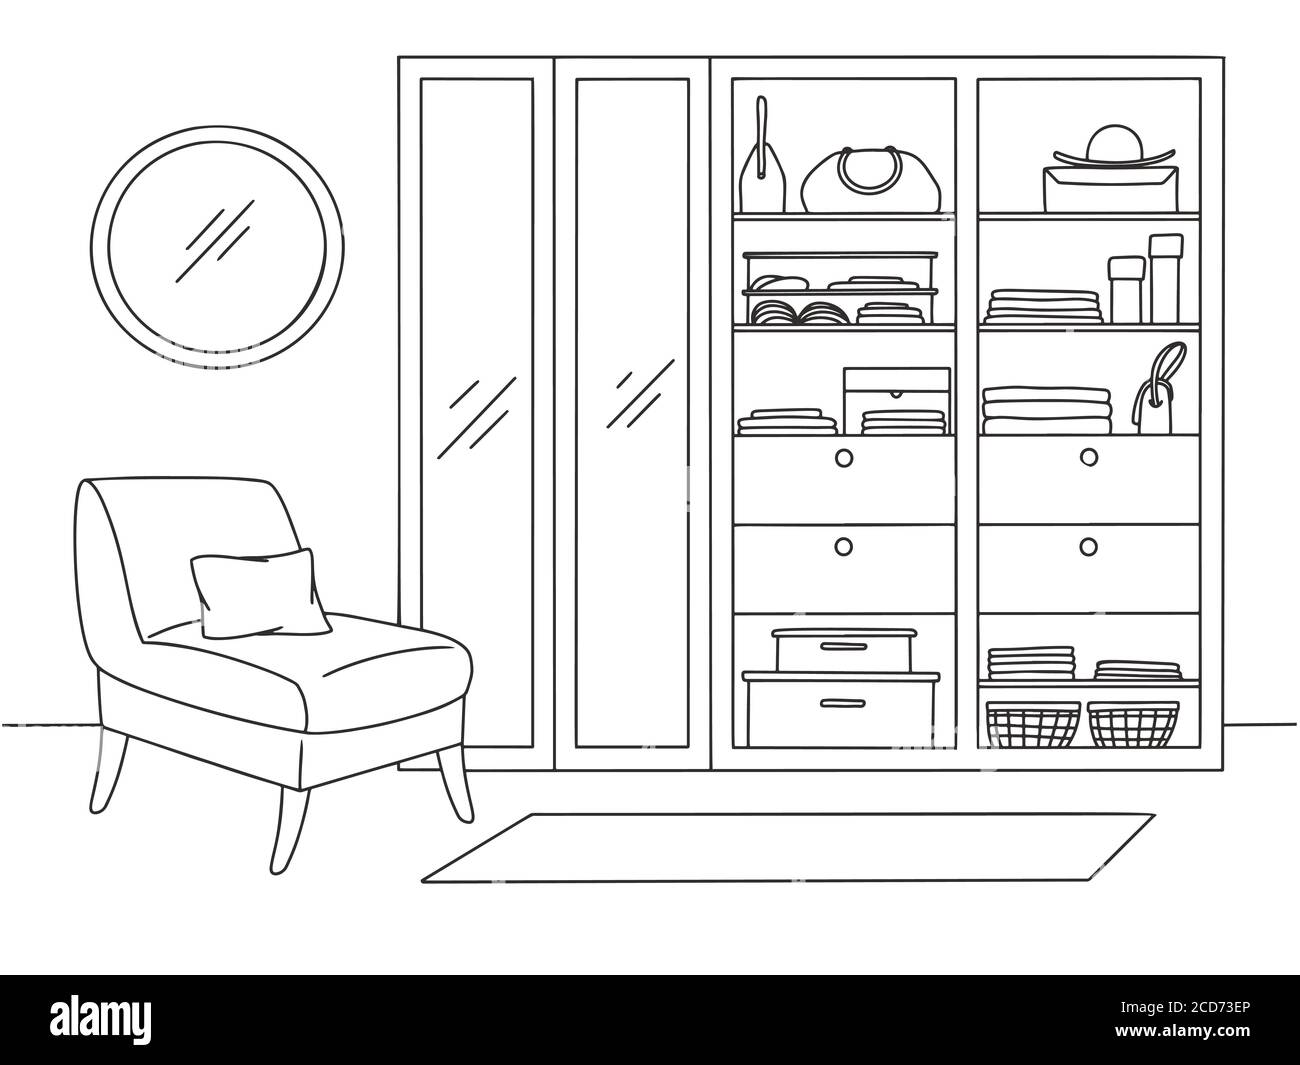 Linear sketch wardrobe. Wardrobe, armchair and different elements of the interior on a white background. Vector illustration Stock Vector